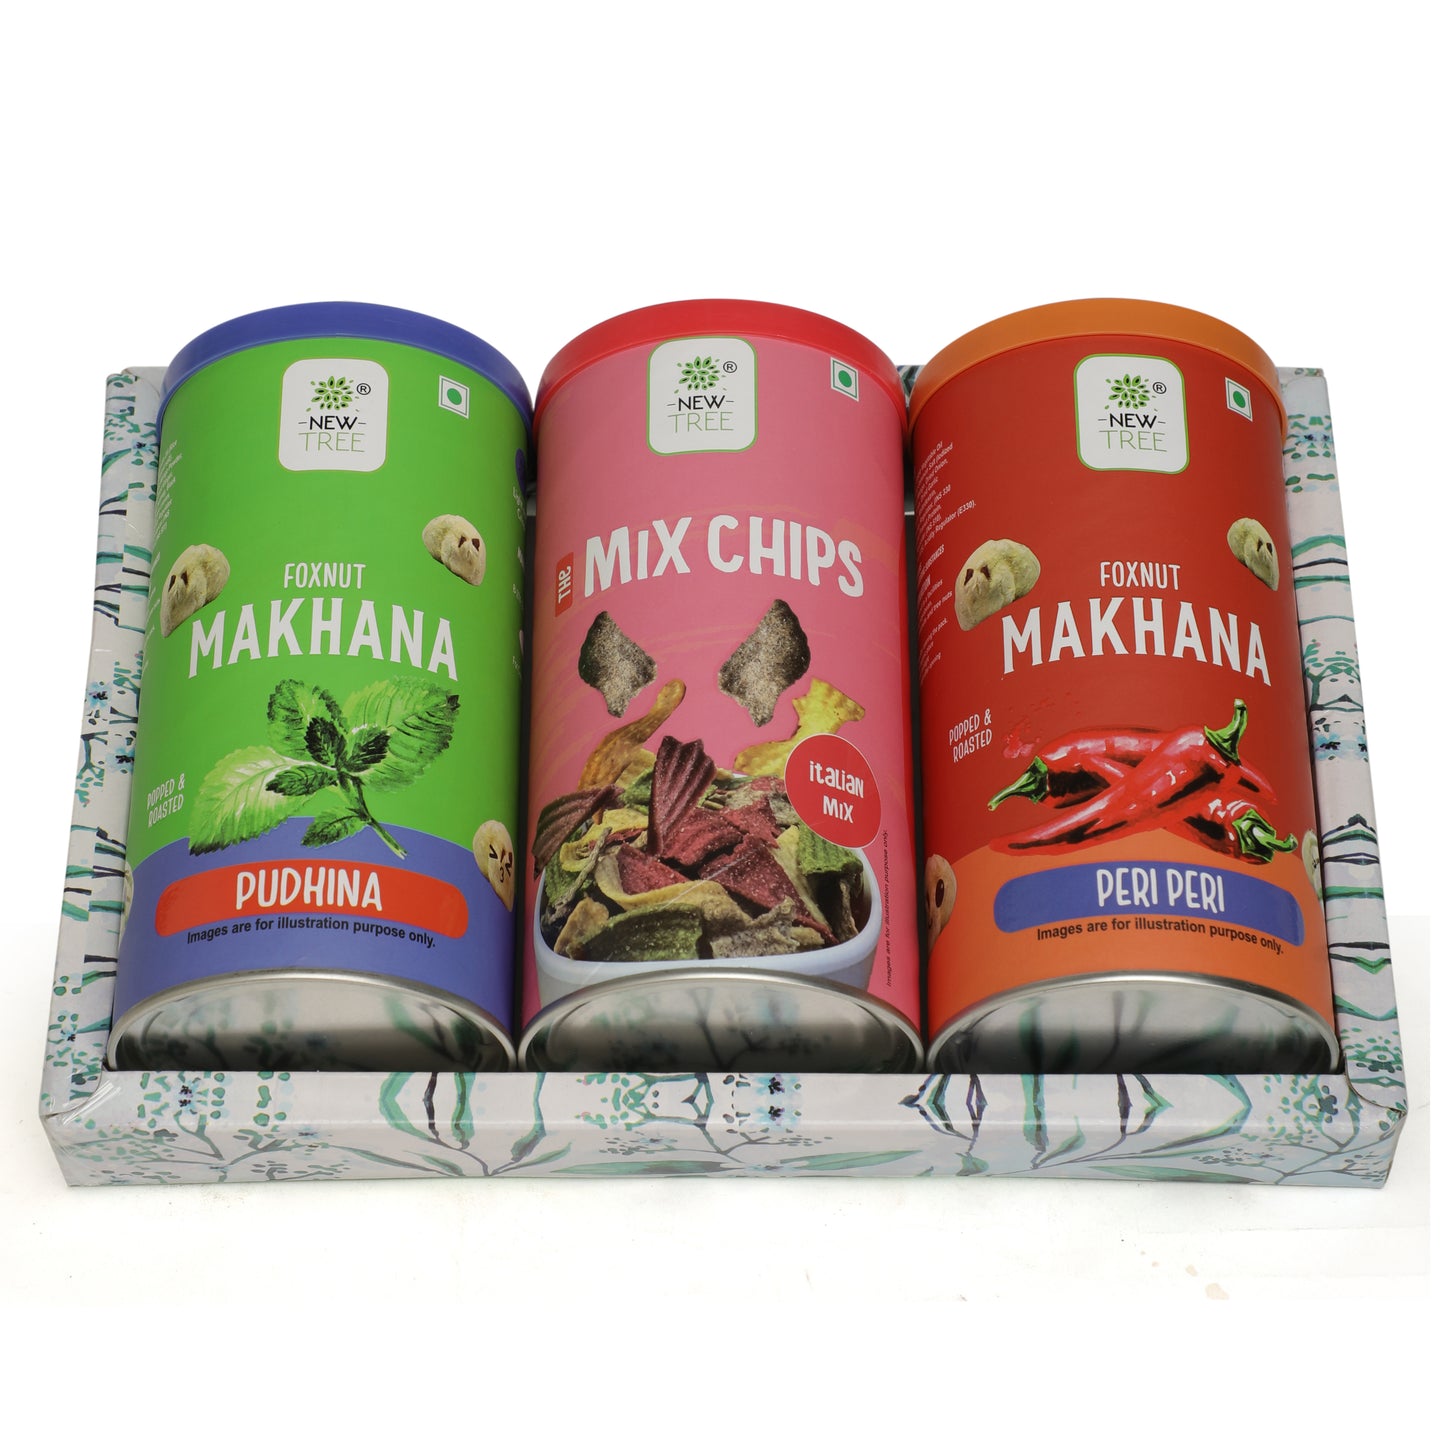 Makhana Fiesta: Enjoy Makhana and Chips in this delightful pack.